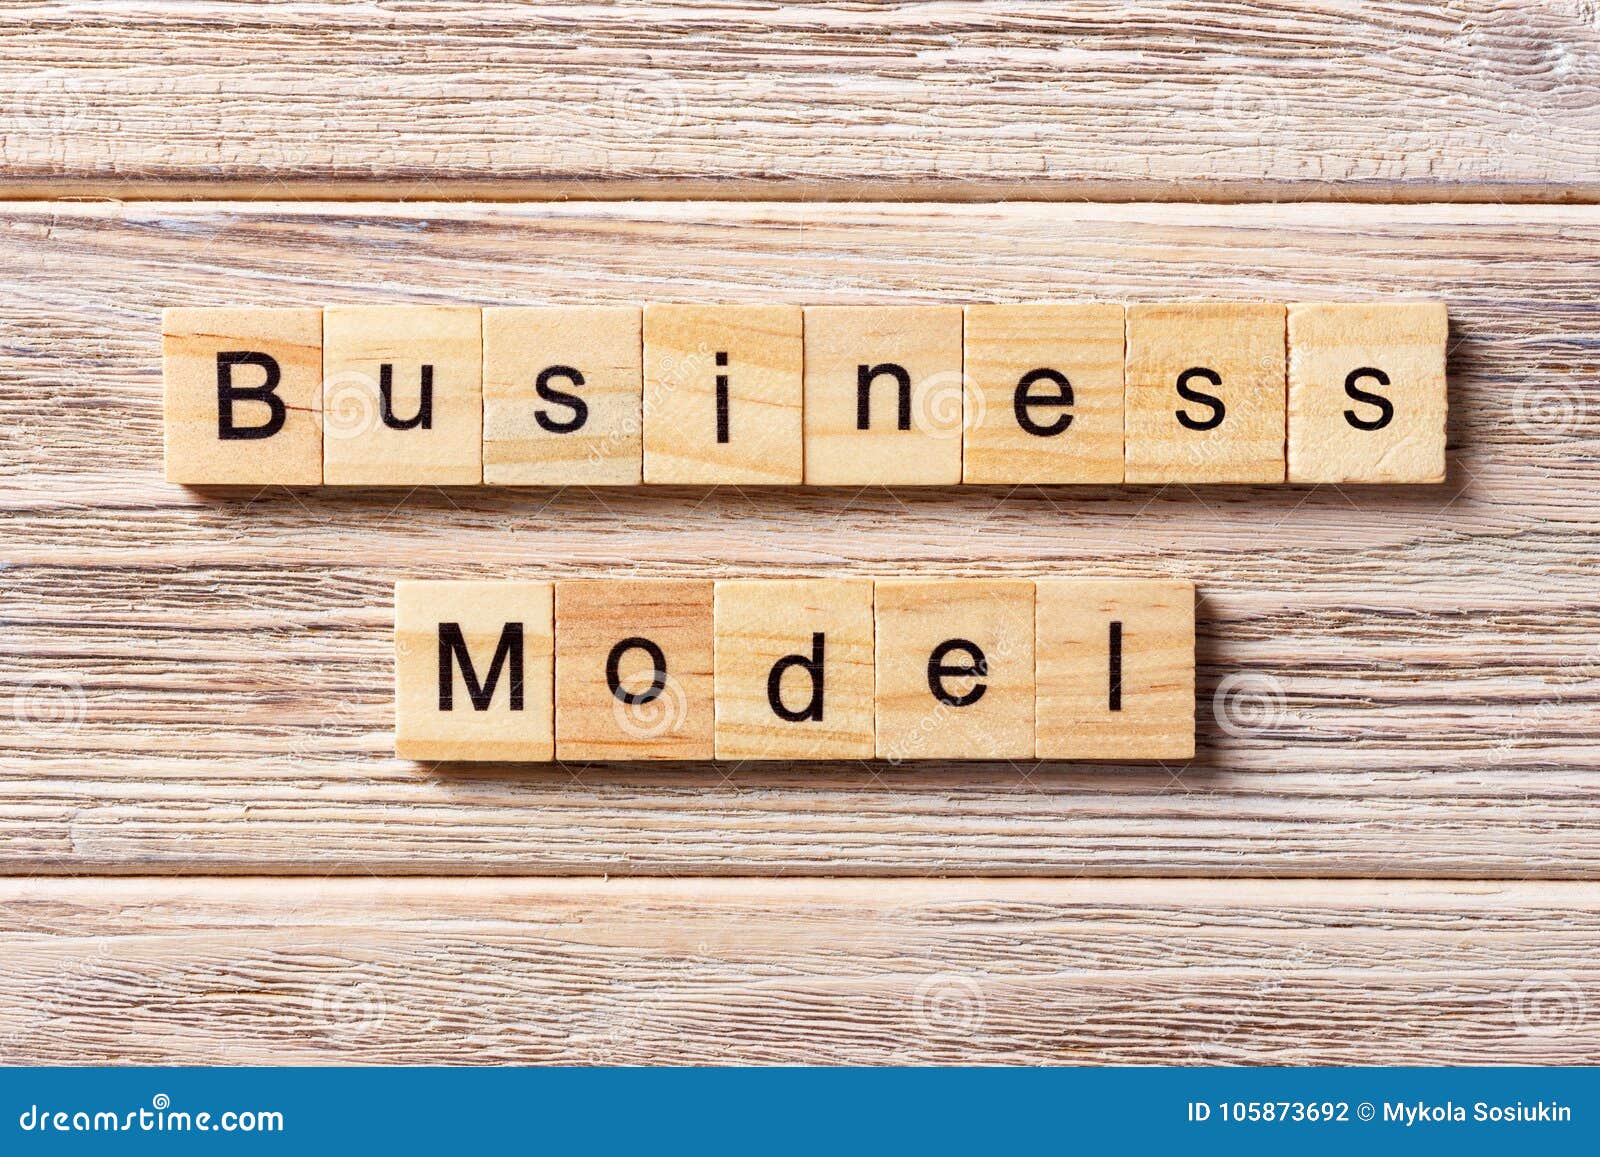 business model word meaning